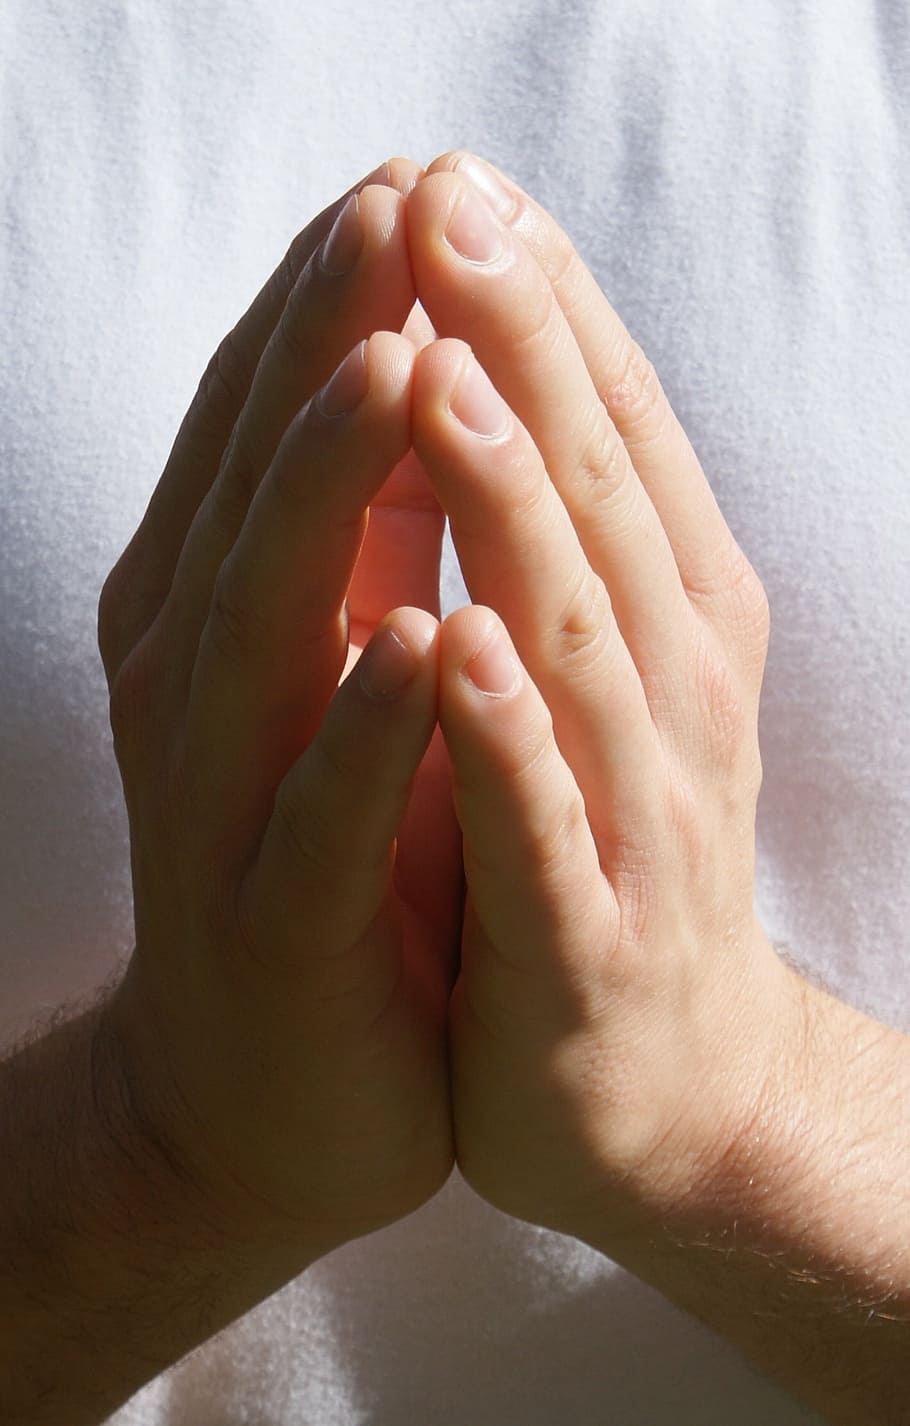 person, wearing, white, top, praying, hands, hand, meditation, pray, faith